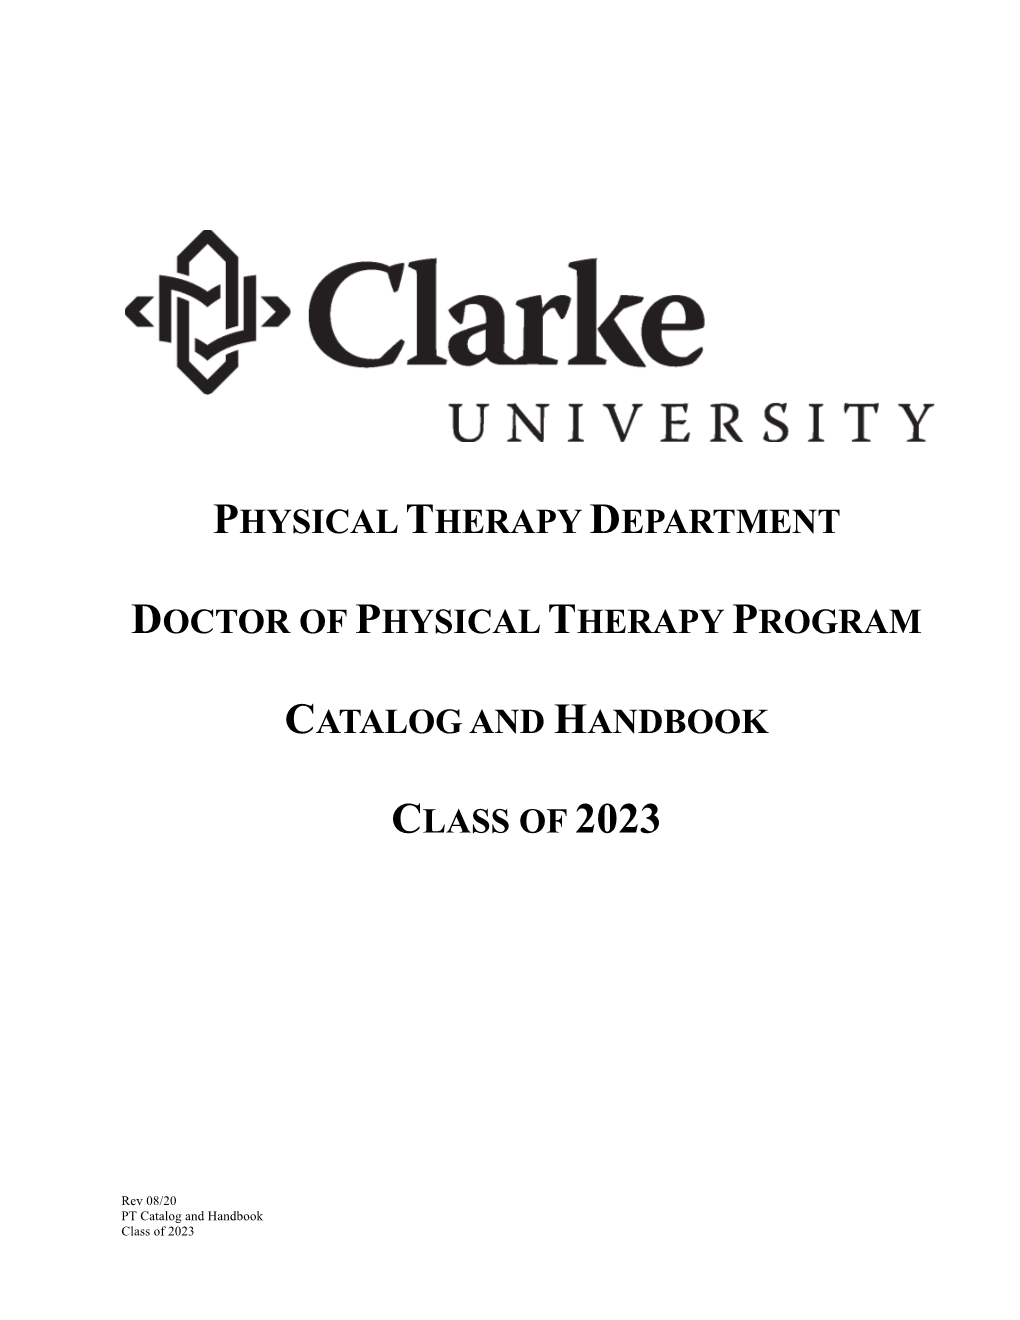 Physical Therapy Graduate Catalog and Handbook – Class of 2023